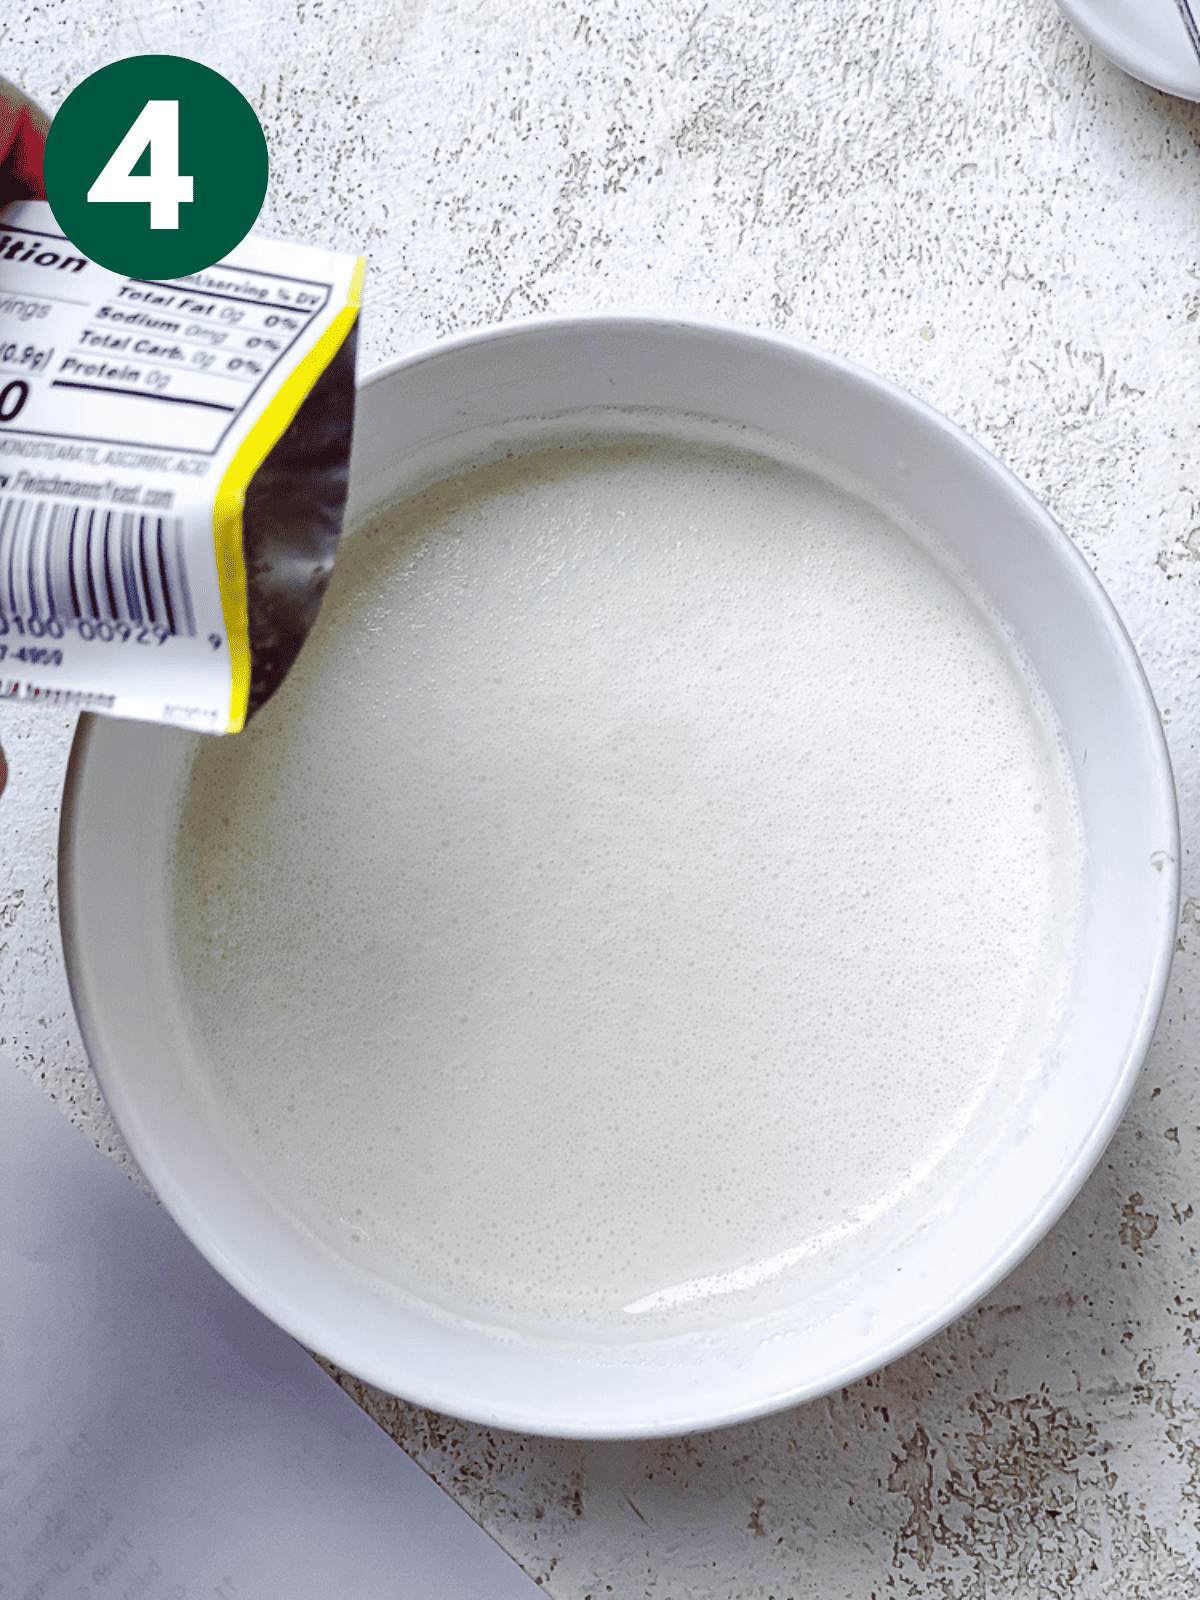 pouring a packet of yeast into a bowl of vegan buttermilk.